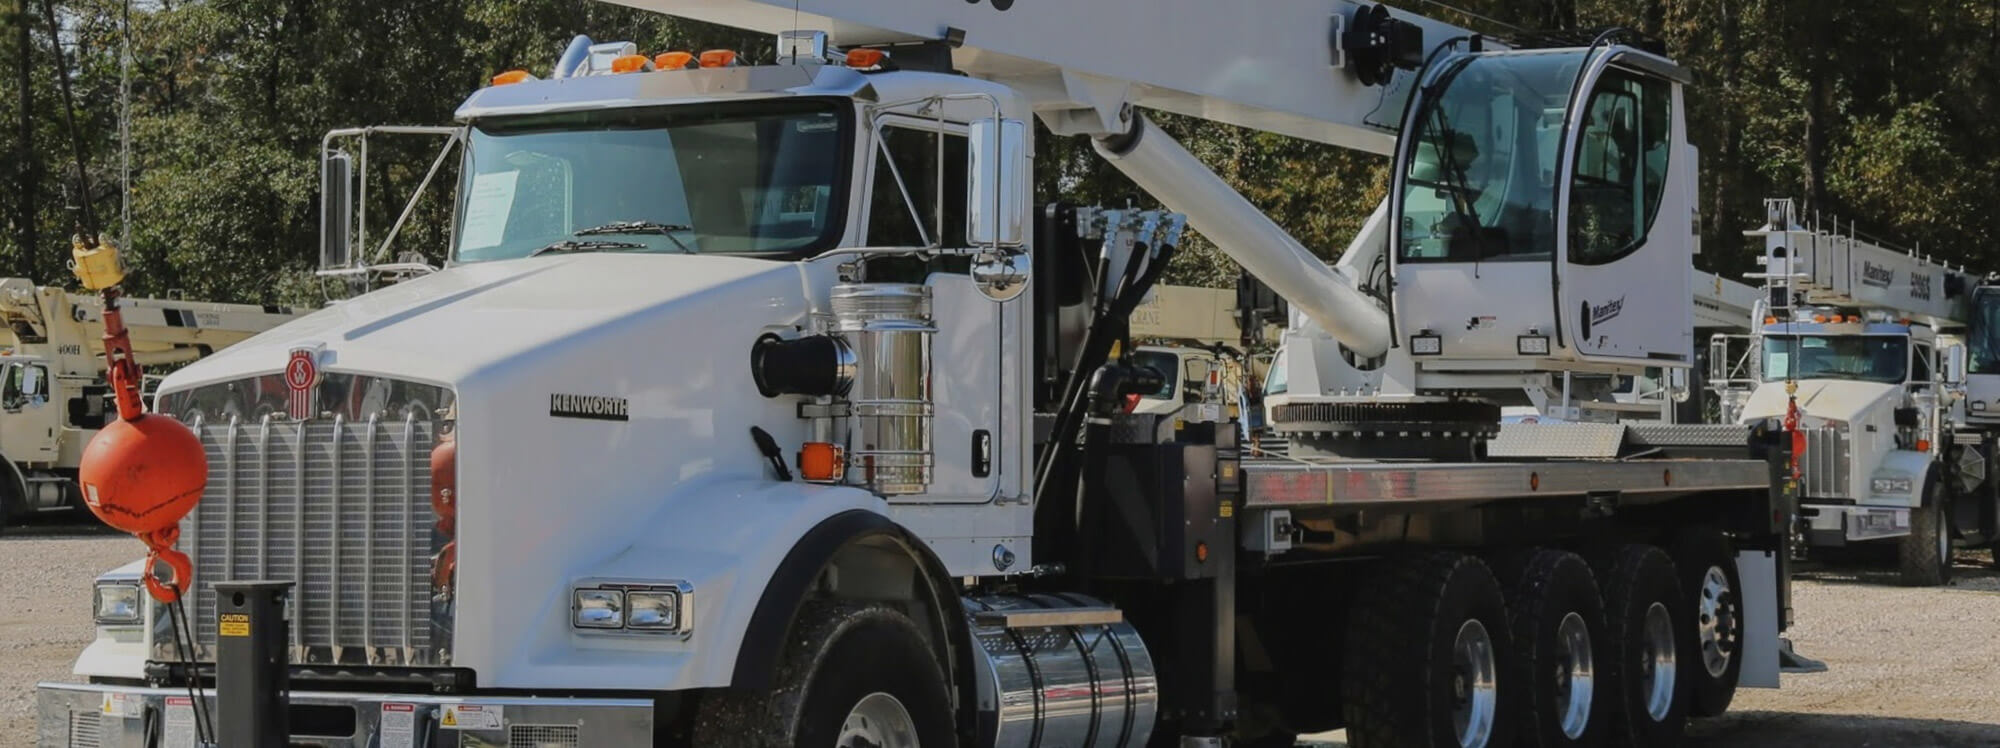 Boom Truck Rental and Mechanic Trucks for Sale with CraneWorks